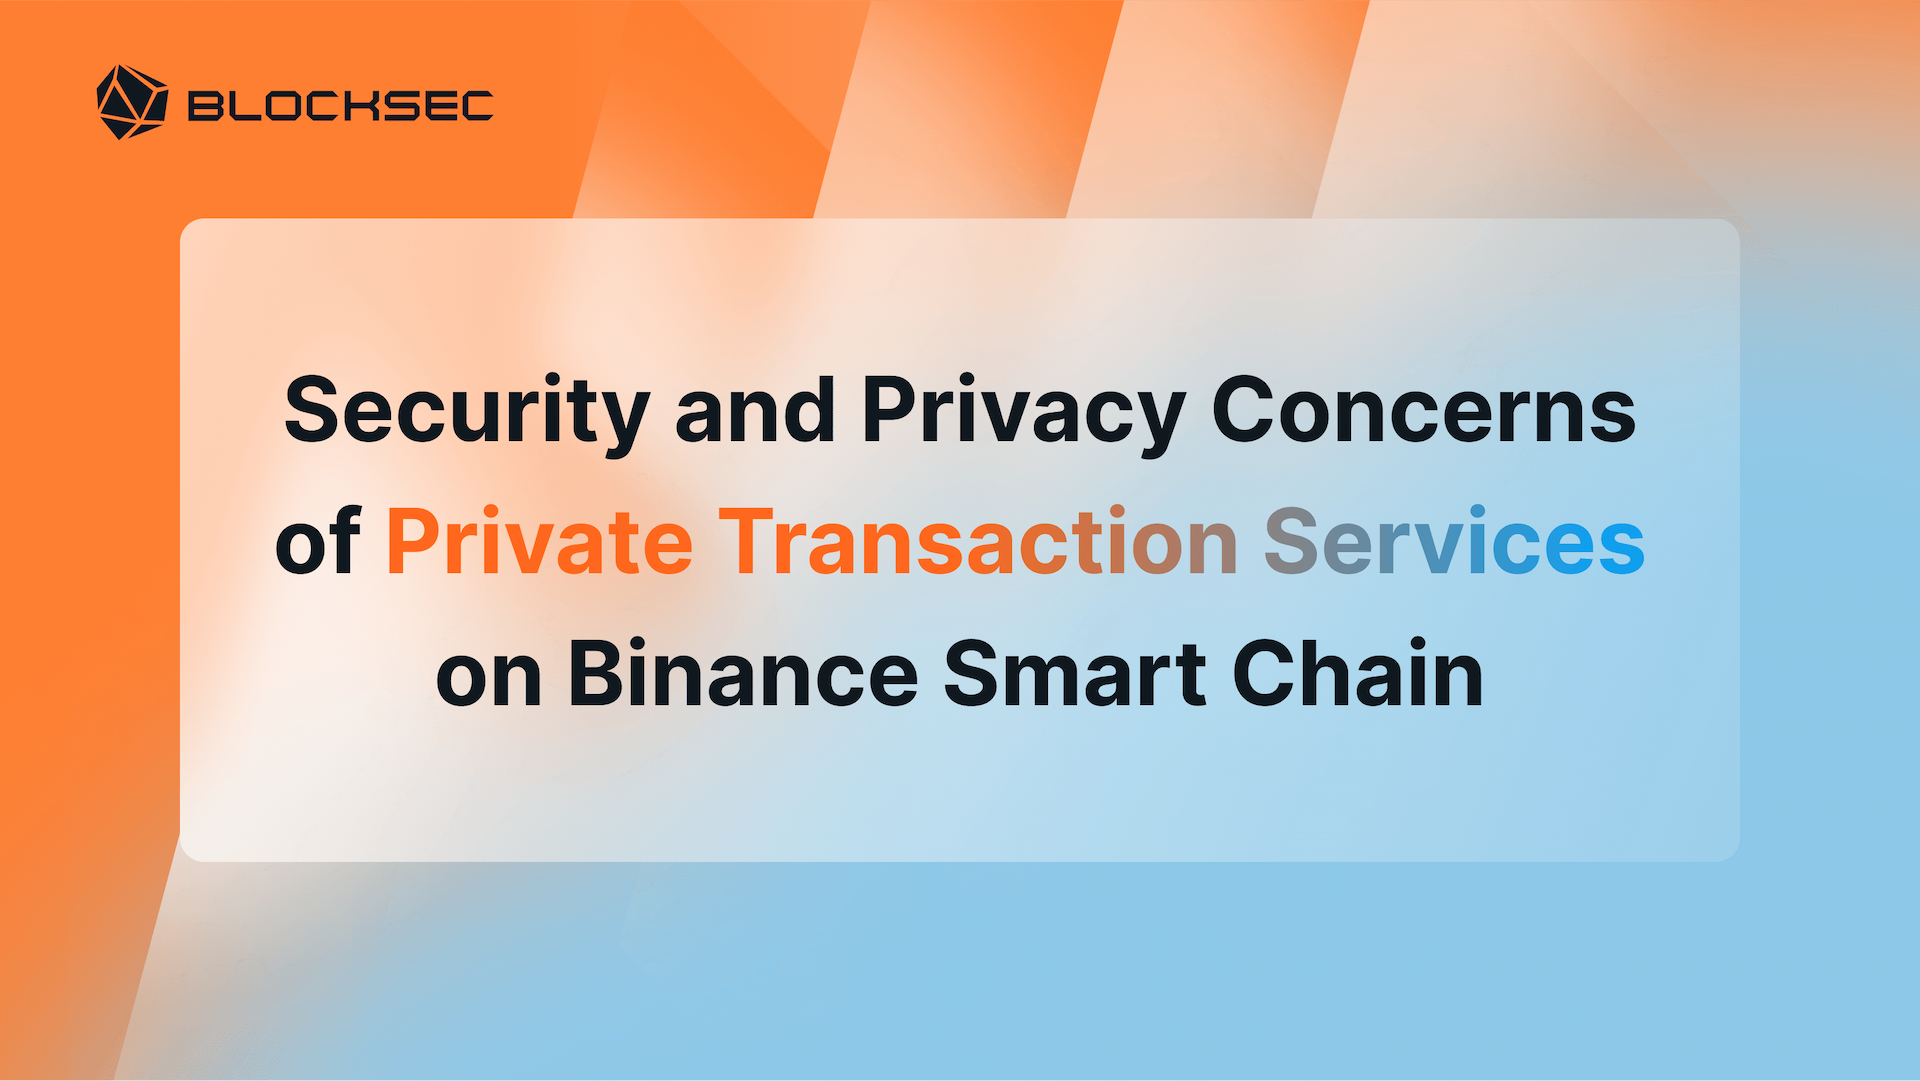 Security and Privacy Concerns of Private Transaction Services on Binance Smart Chain